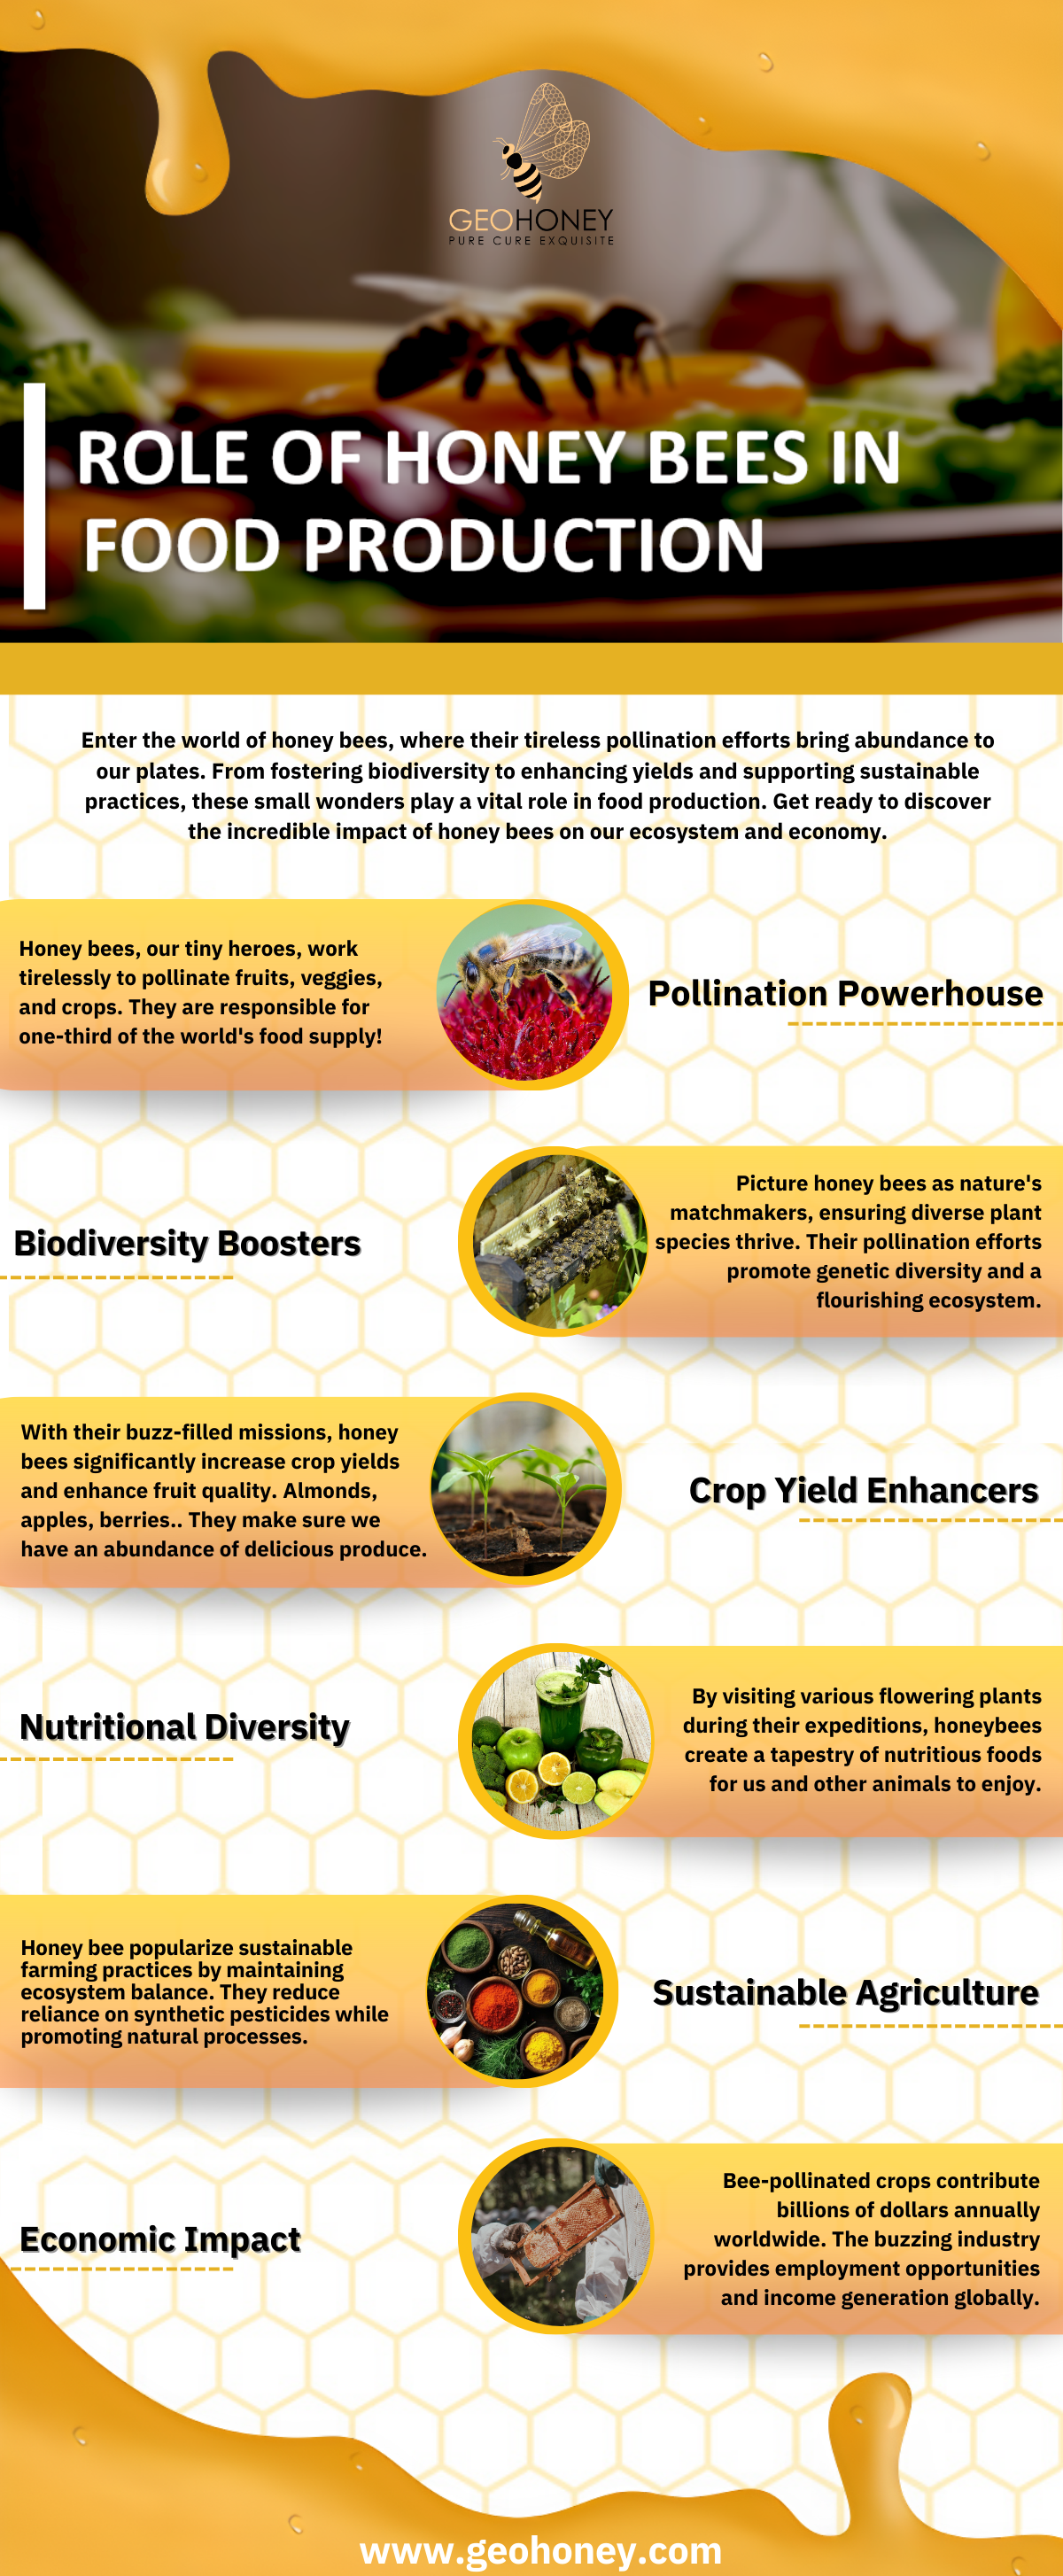 Role of Honey Bees in Food Production